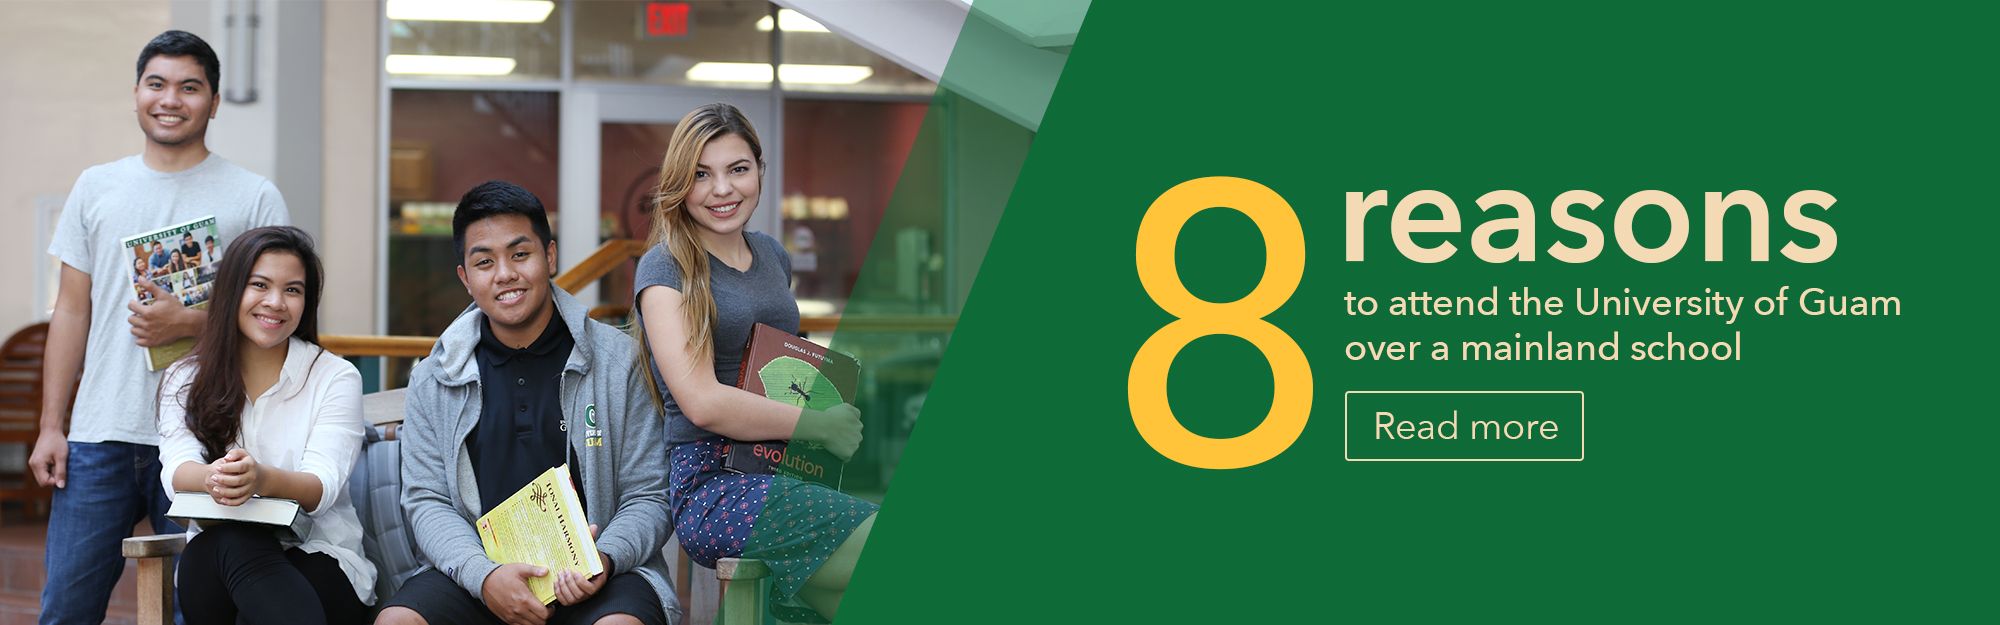 8 reasons to attend UOG over a mainland school